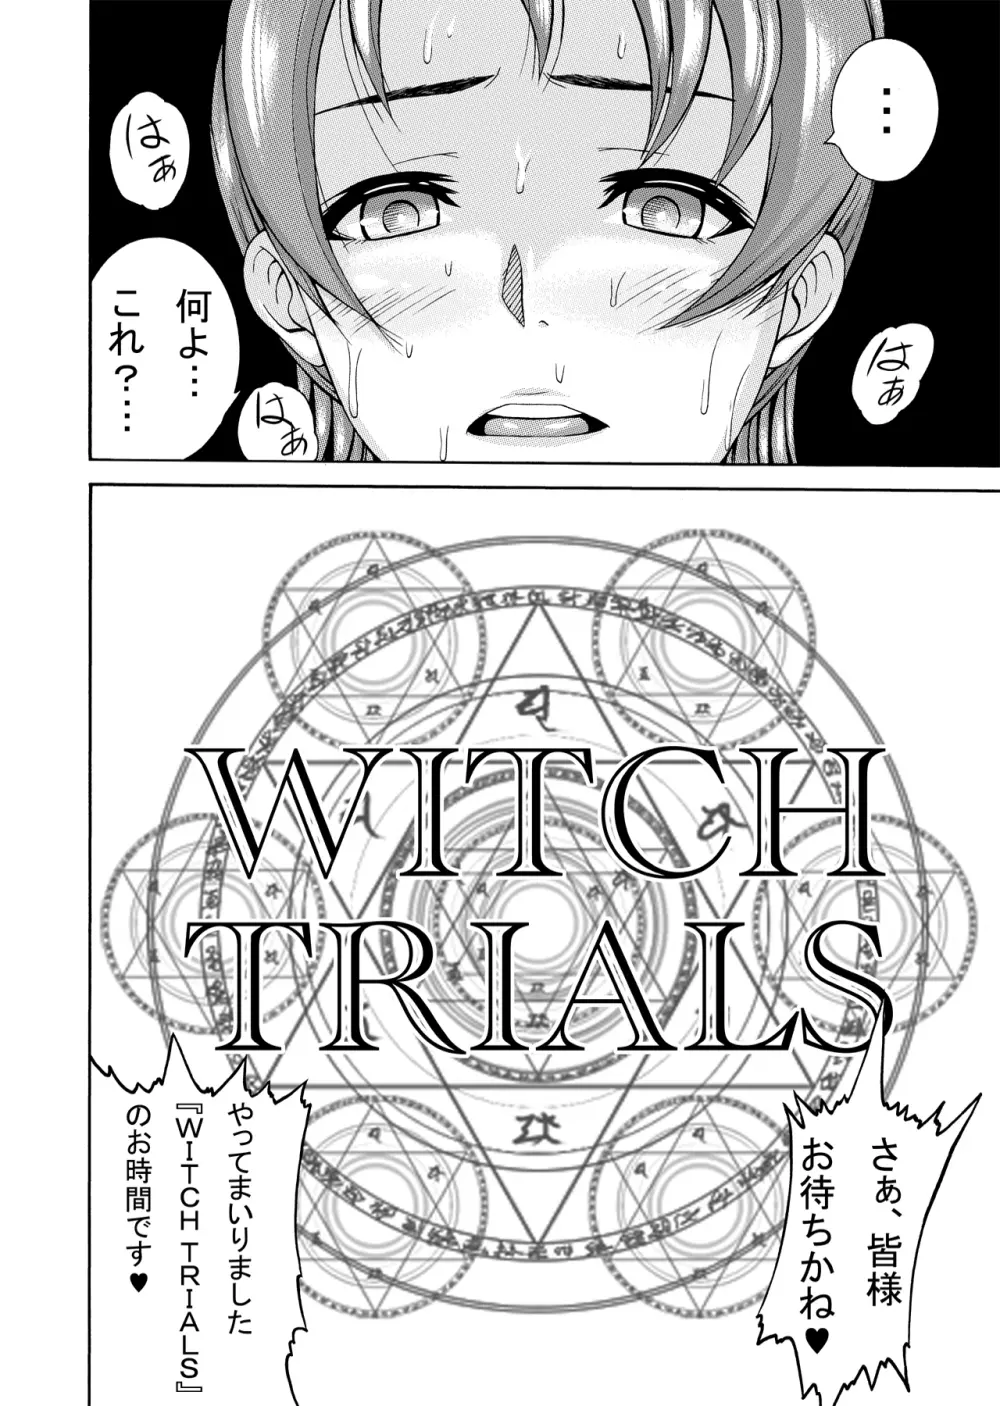 [remora works] FUTACOLO CO -WITCH TRIALS- feat.カラス VOL.001 DL版 - page6